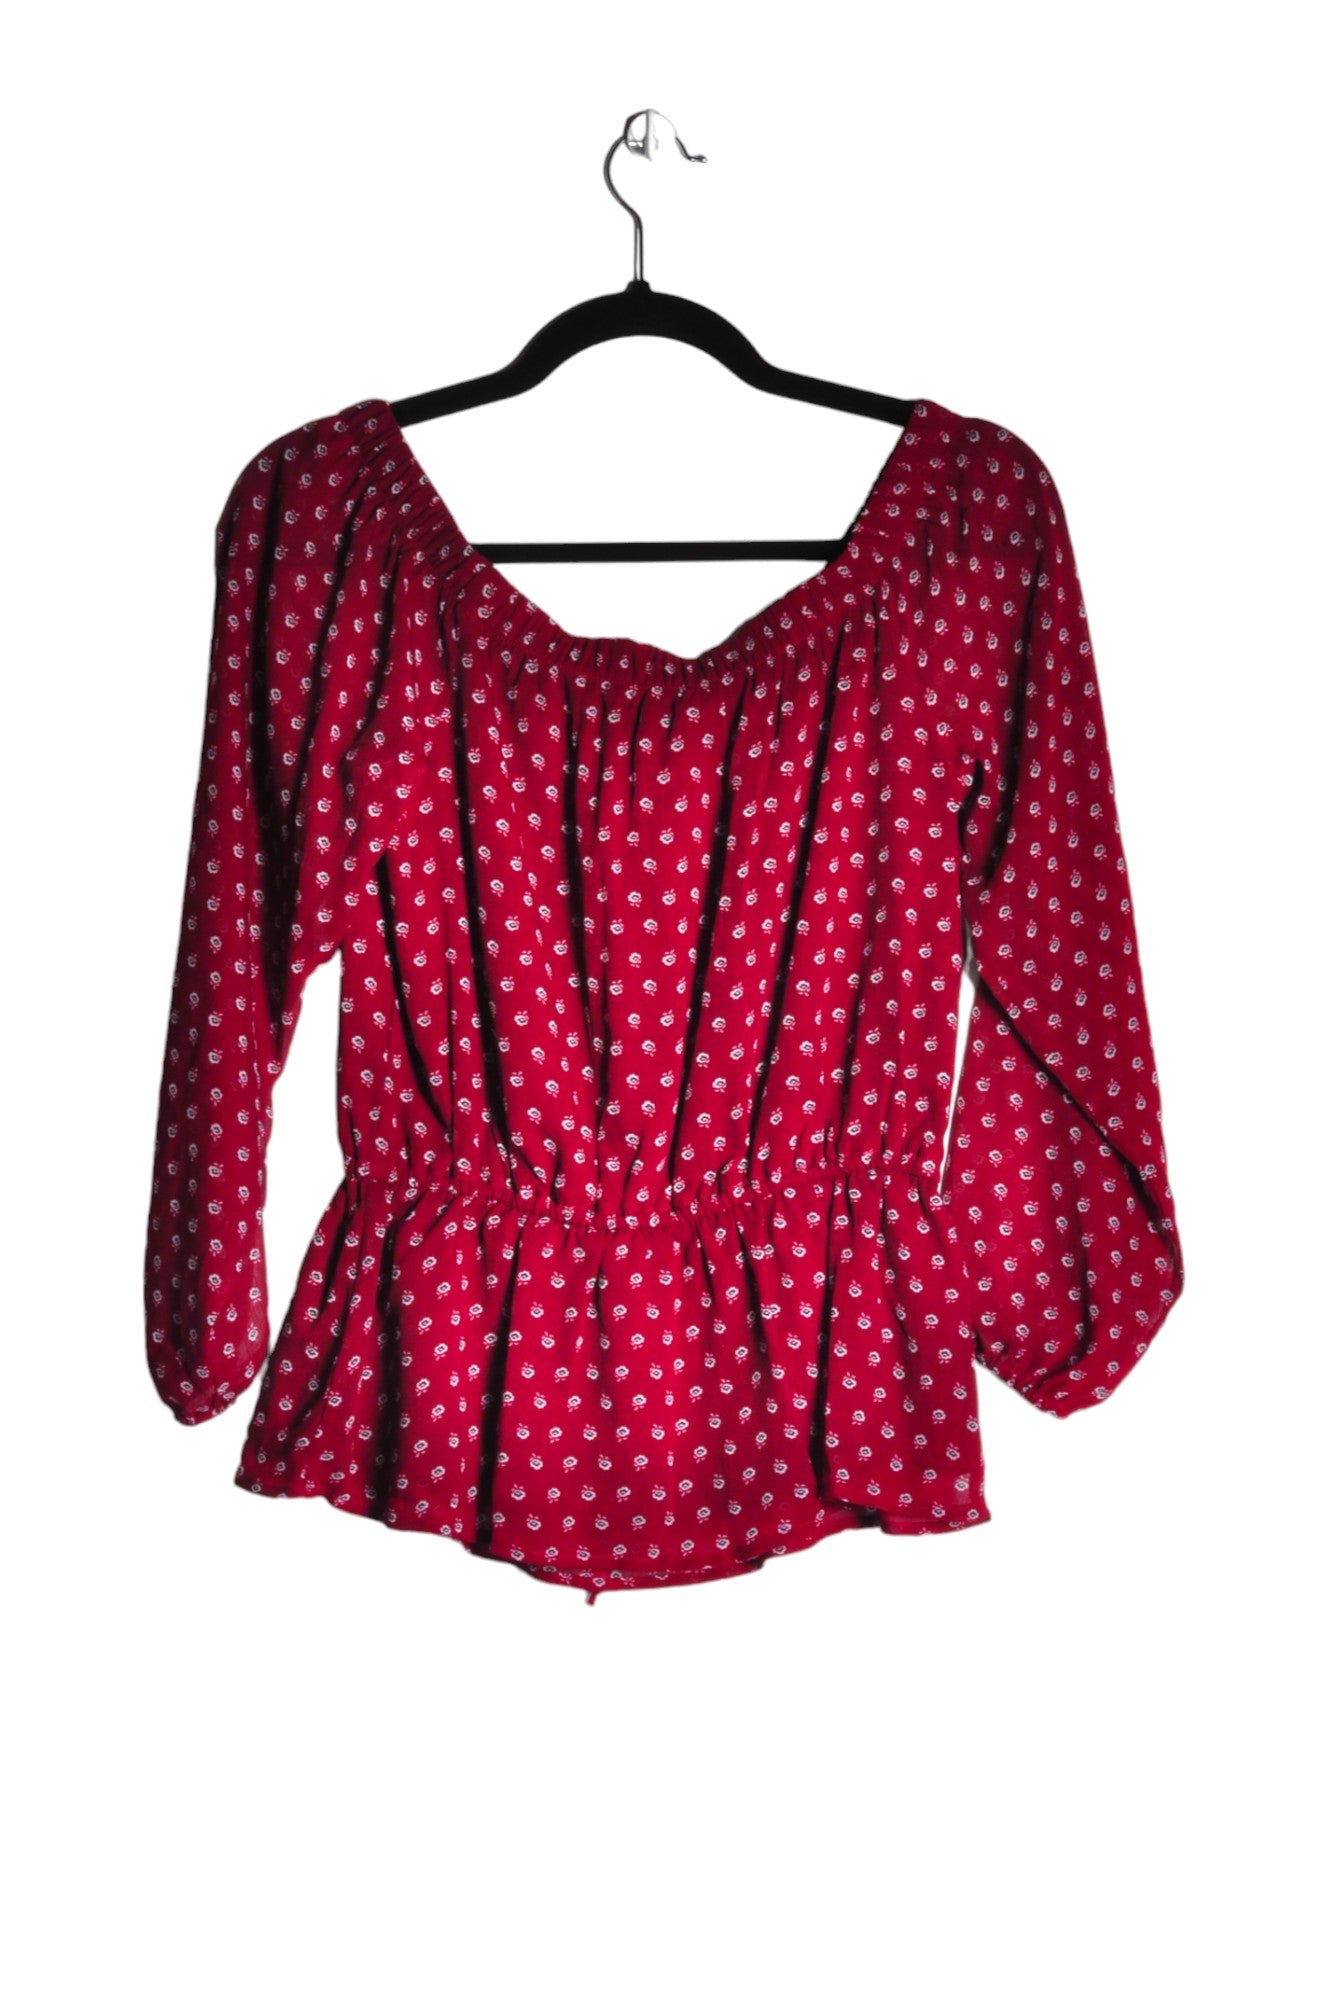 ABERCROMBIE & FITCH Women Blouses Regular fit in Red - Size XS | 23 $ KOOP